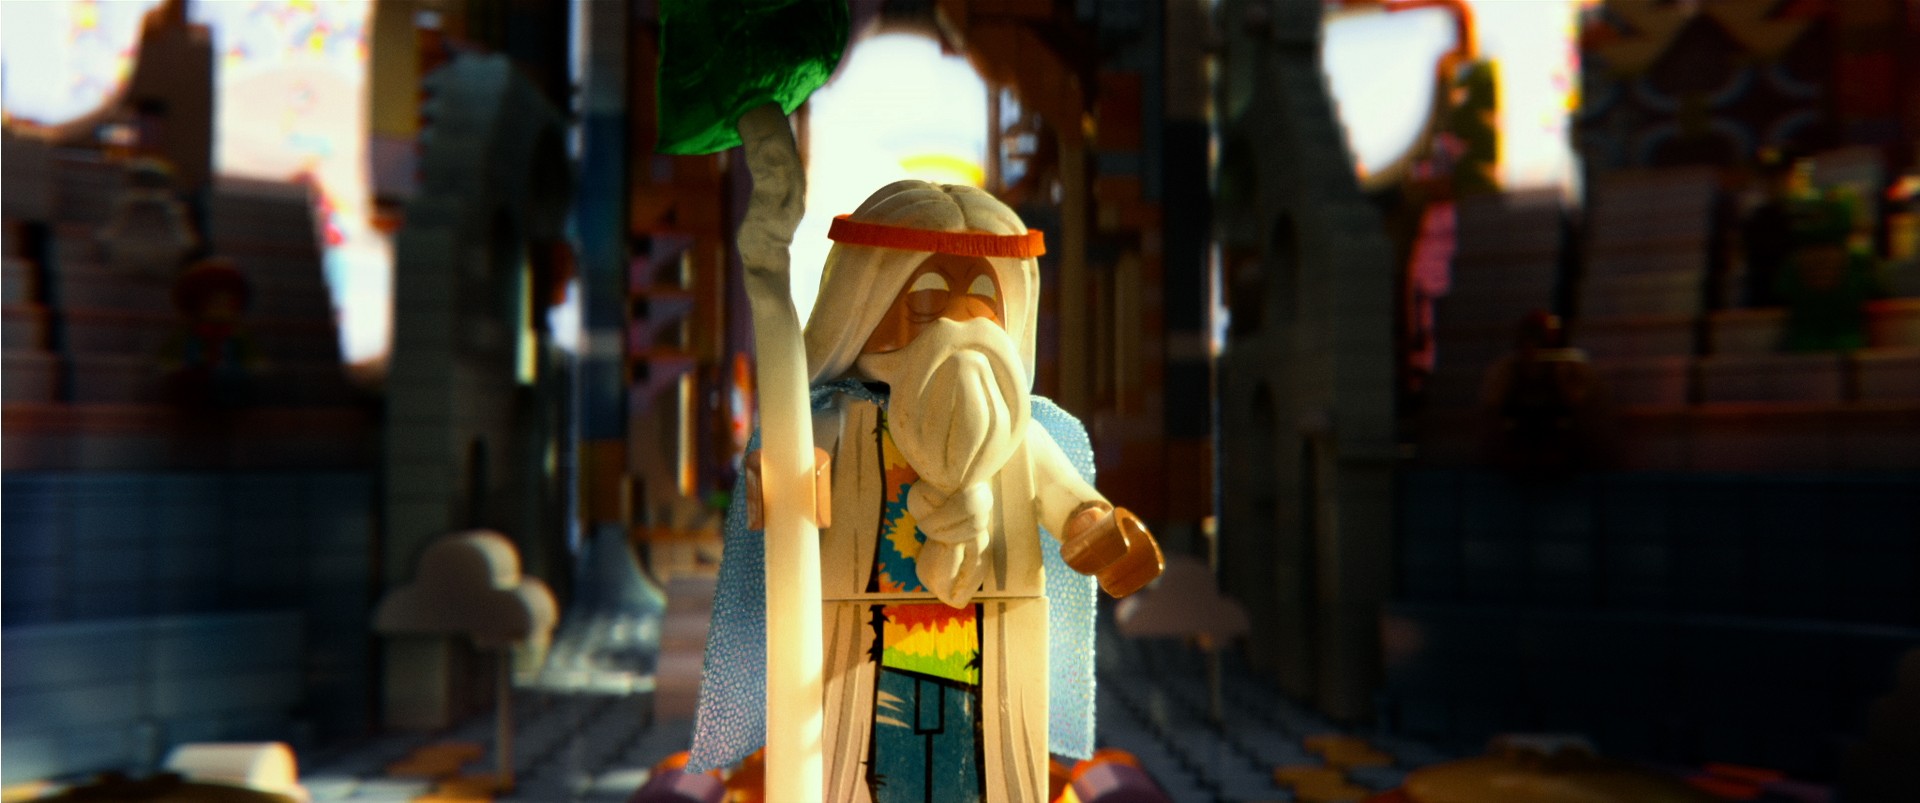 Vitruvius from Warner Bros. Pictures' The Lego Movie (2014)